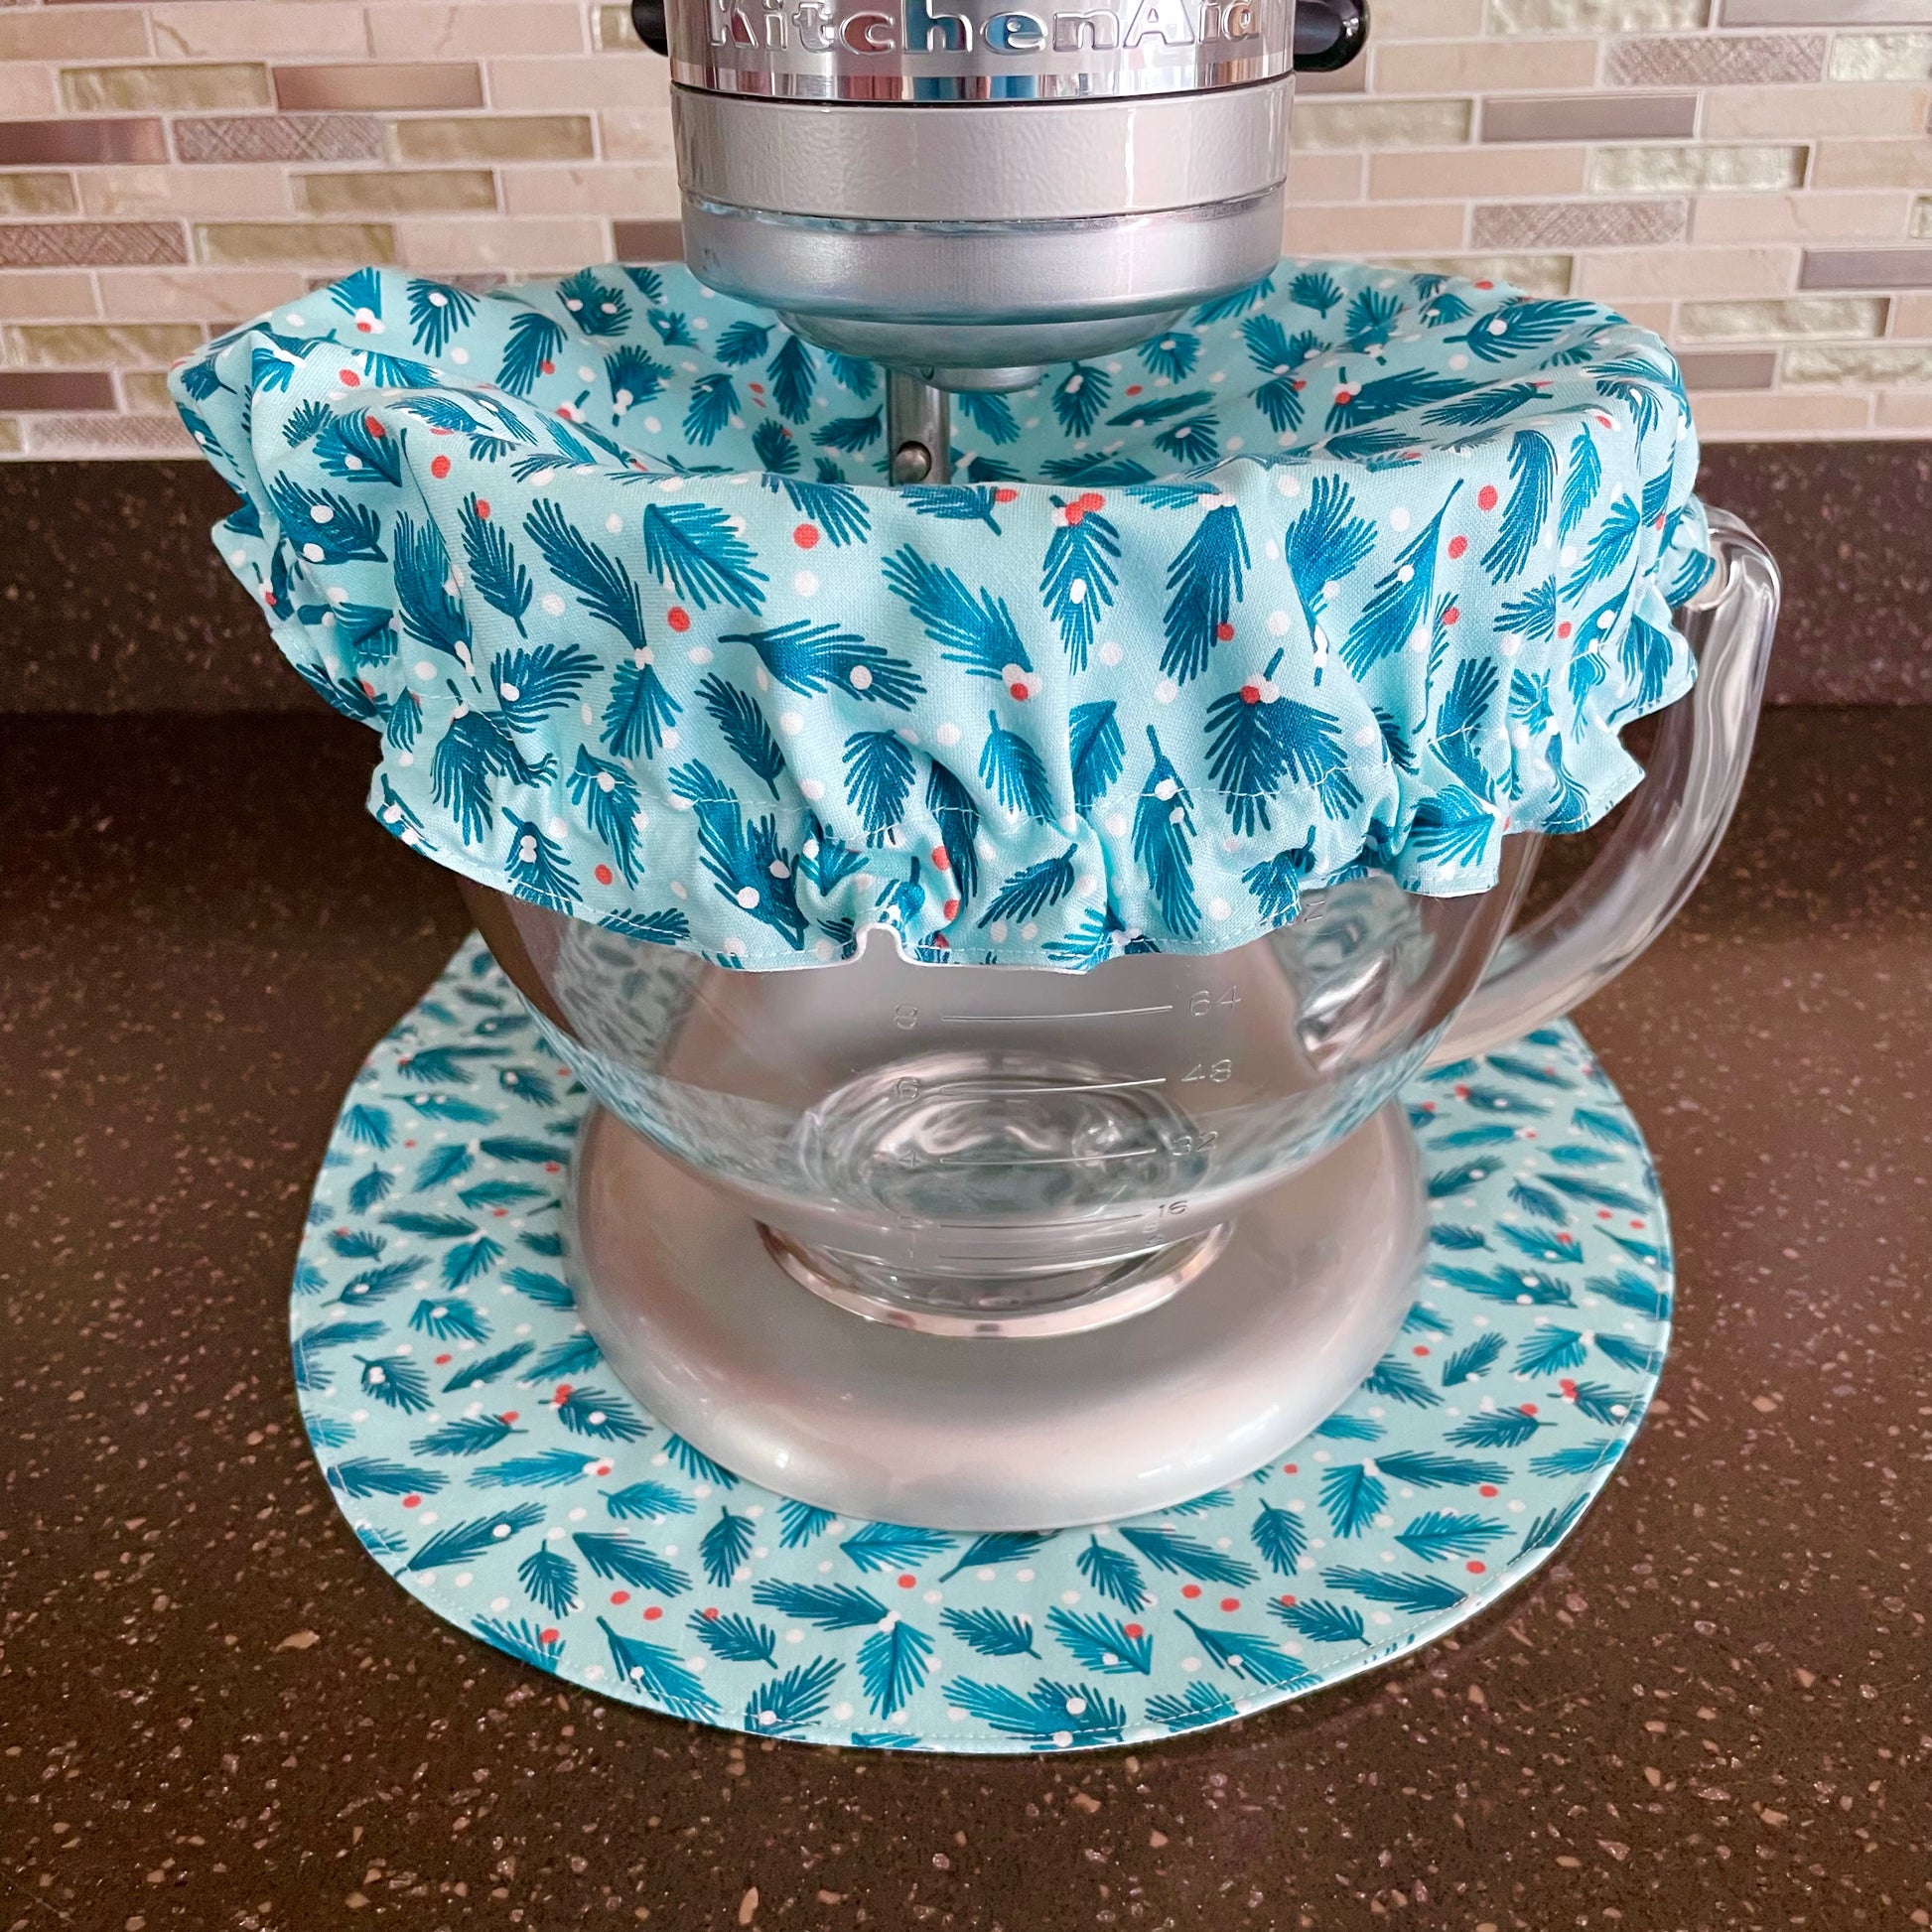 Stand Mixer Cover Dustproof For Kitchen Aid, New Christmas Mixer